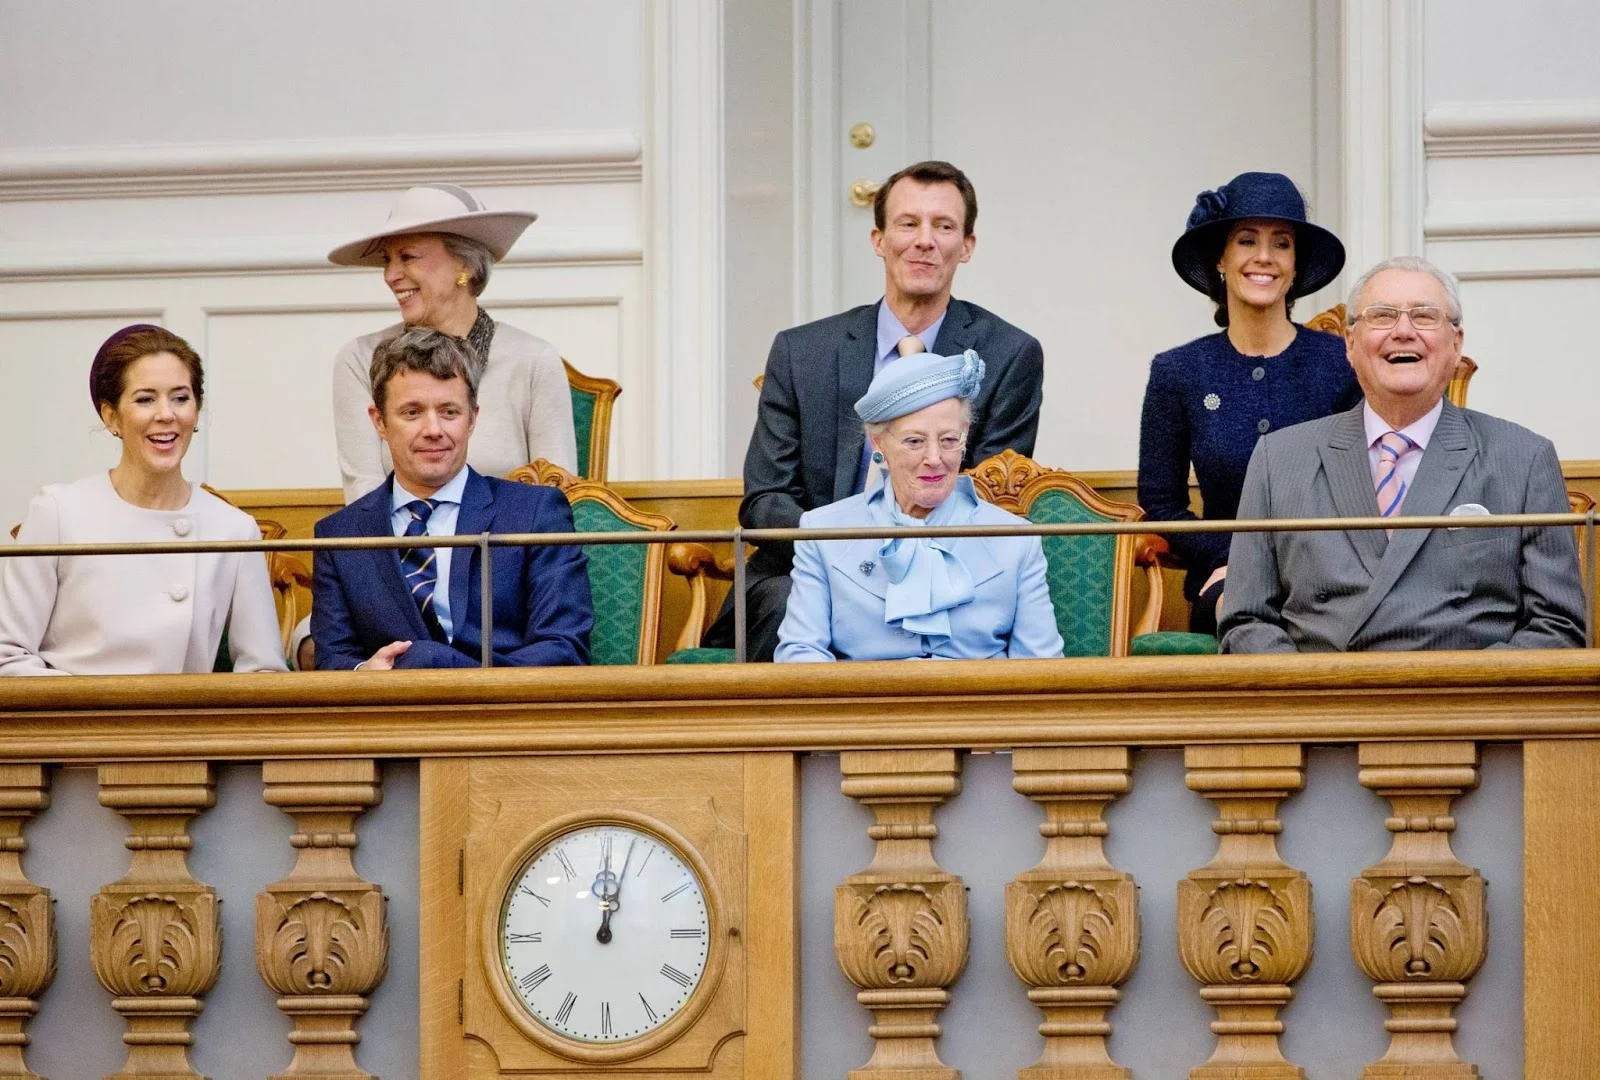 Danish Royal Family attended the opening of the Danish Parliament at Christiansborg Palace